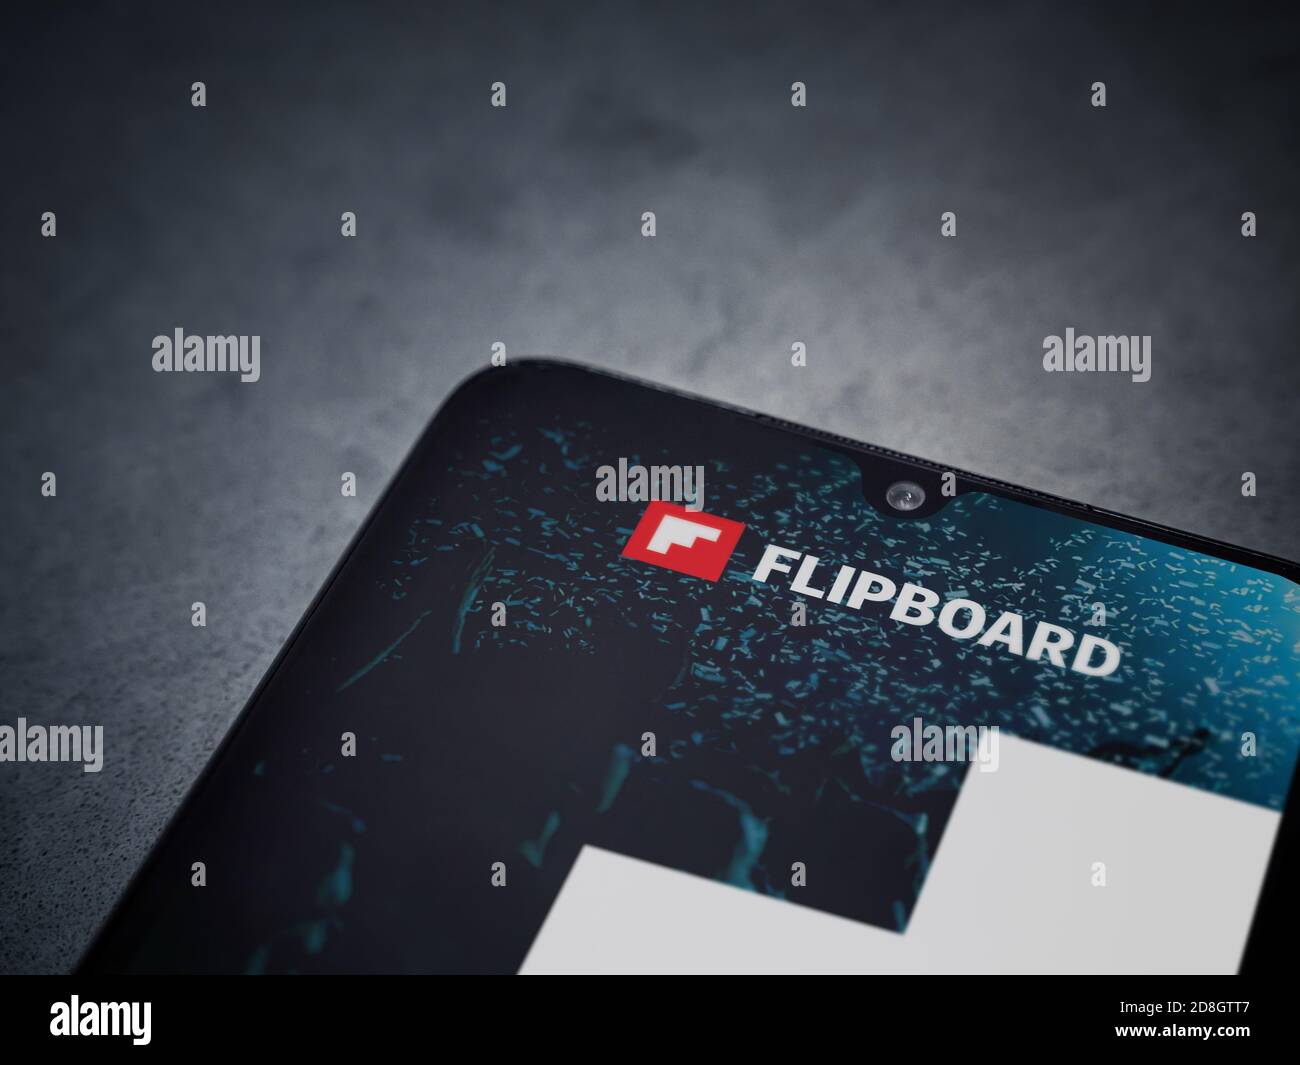 Lod, Israel - July 8, 2020: Flipboard app launch screen with logo on the display of a black mobile smartphone on dark marble stone background. Top vie Stock Photo